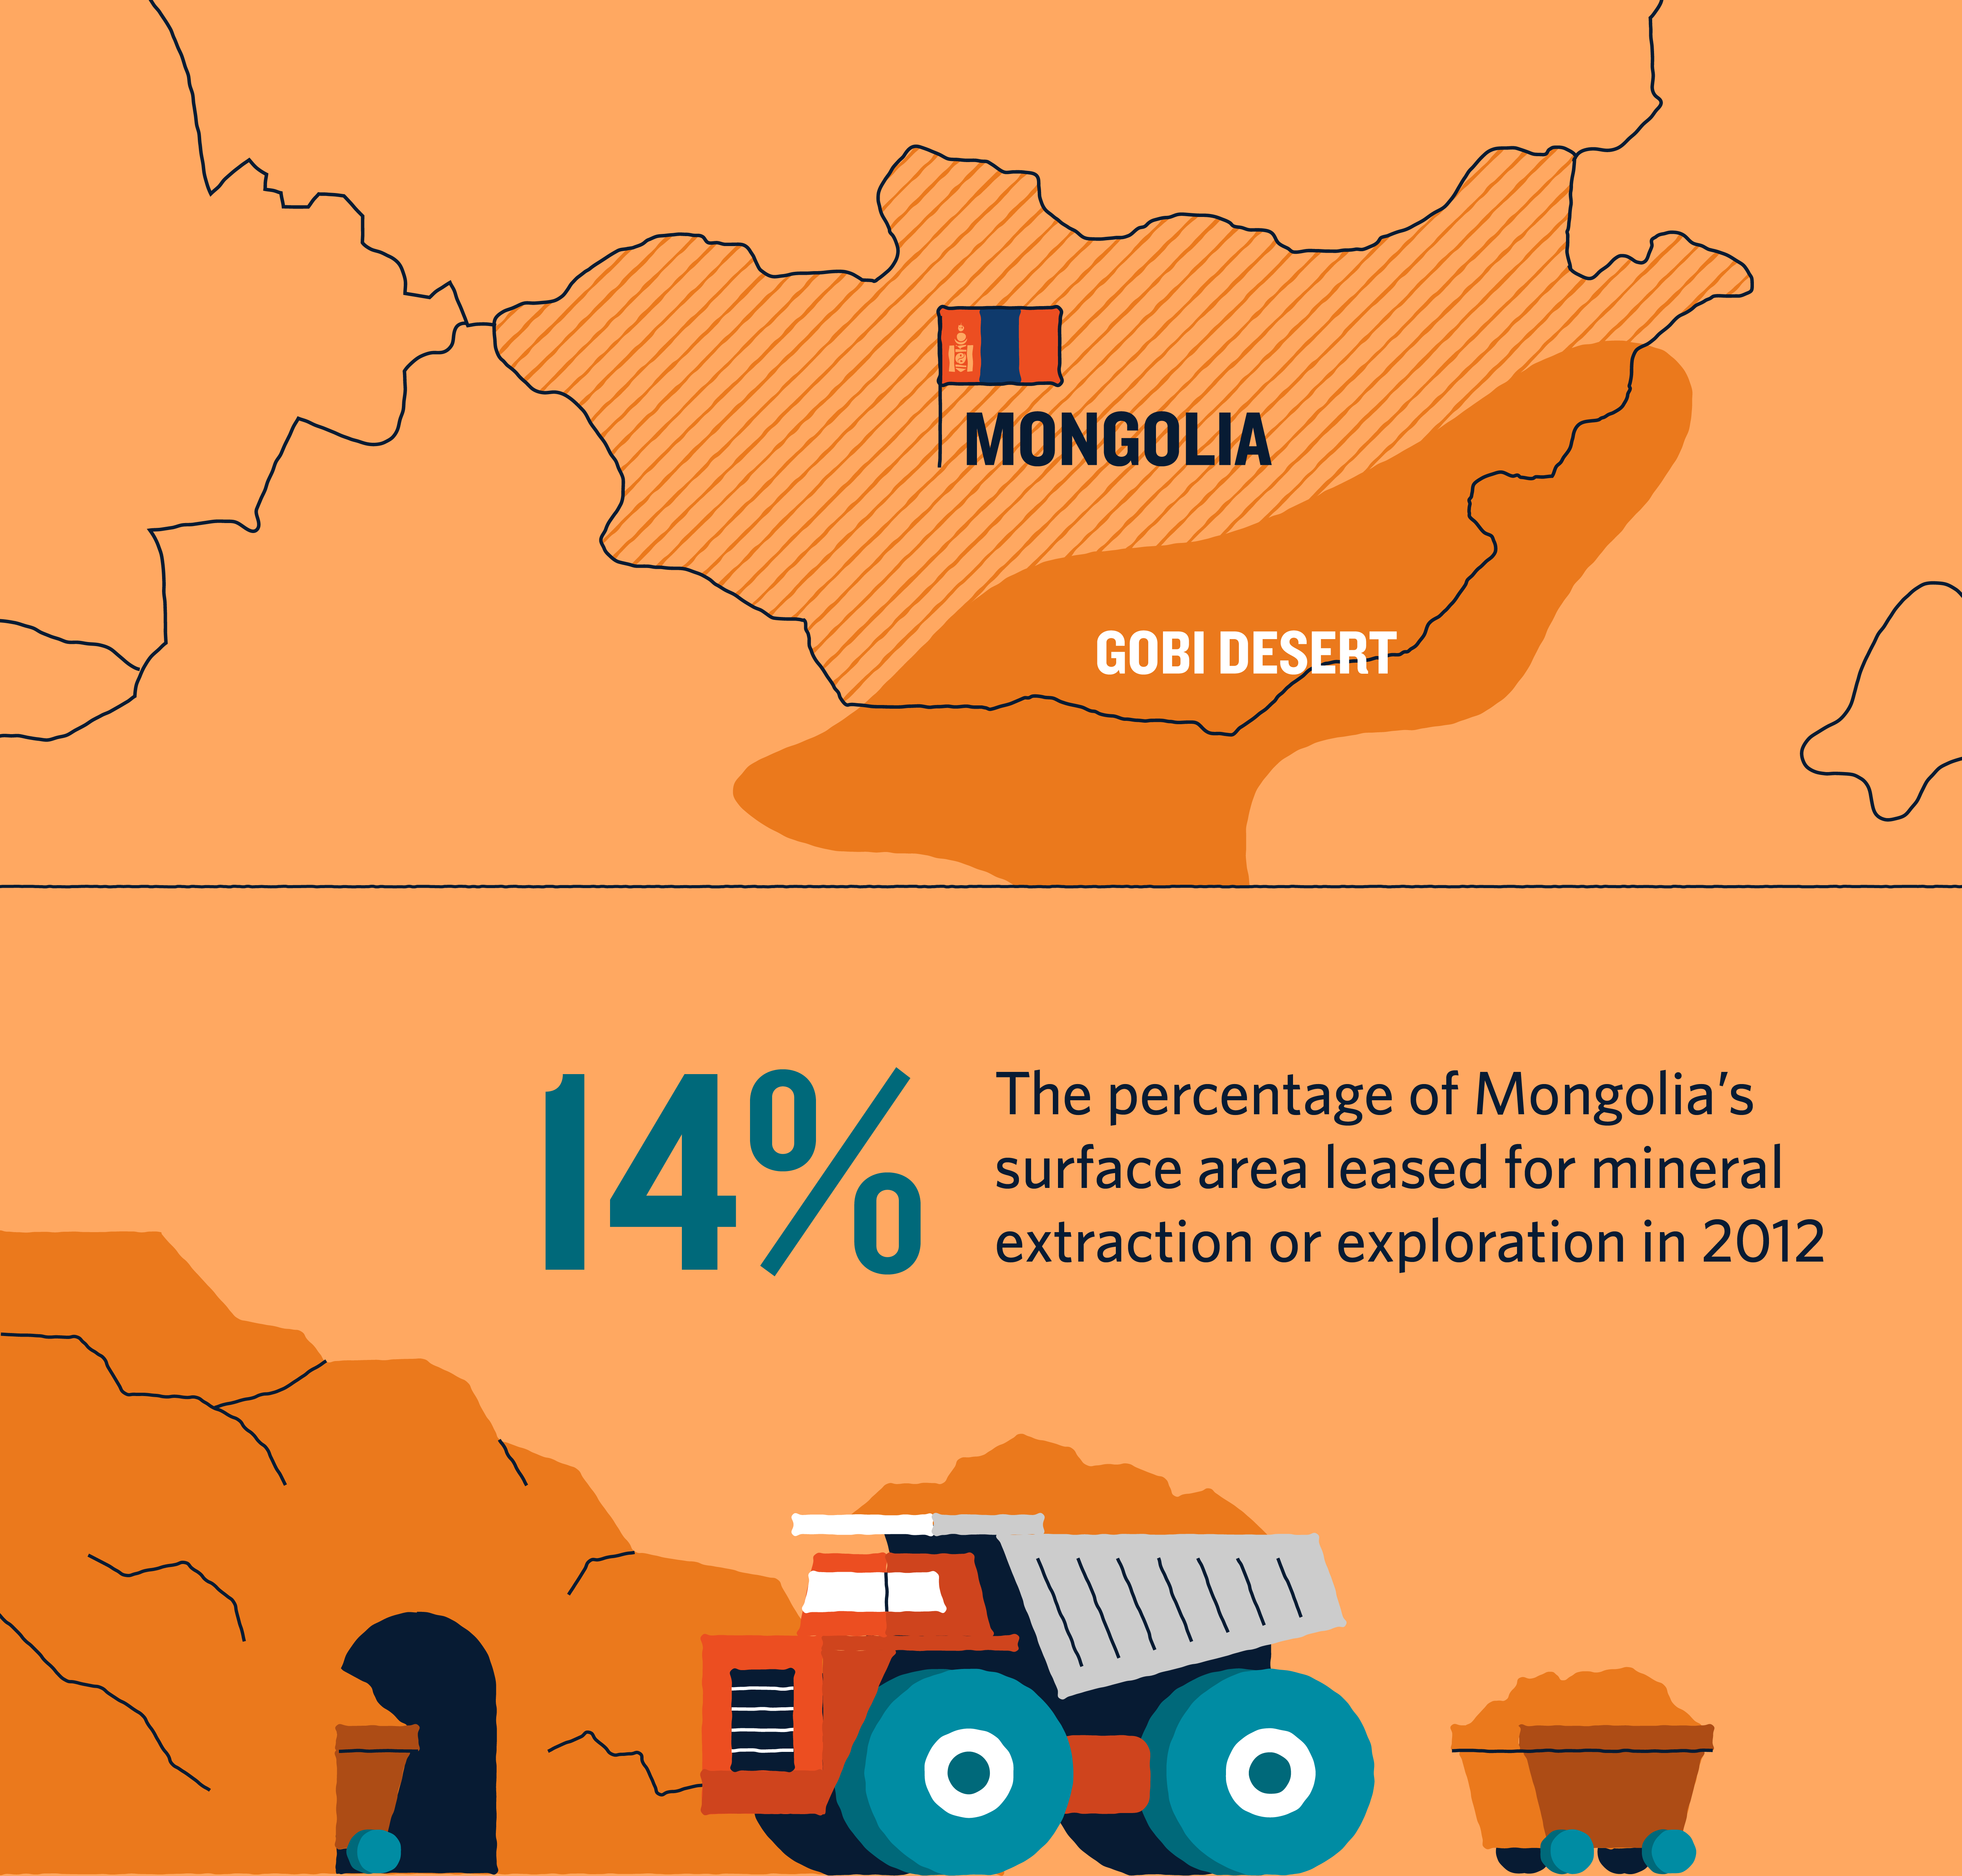 a simplified line map showing the outline of mongolia and the gobi desert, and an illustration of mining equipment with large text that reads 14 percent and smaller text that reads the percentage of Mongolia's surface area leased for mineral extraction or exploitation in 2012